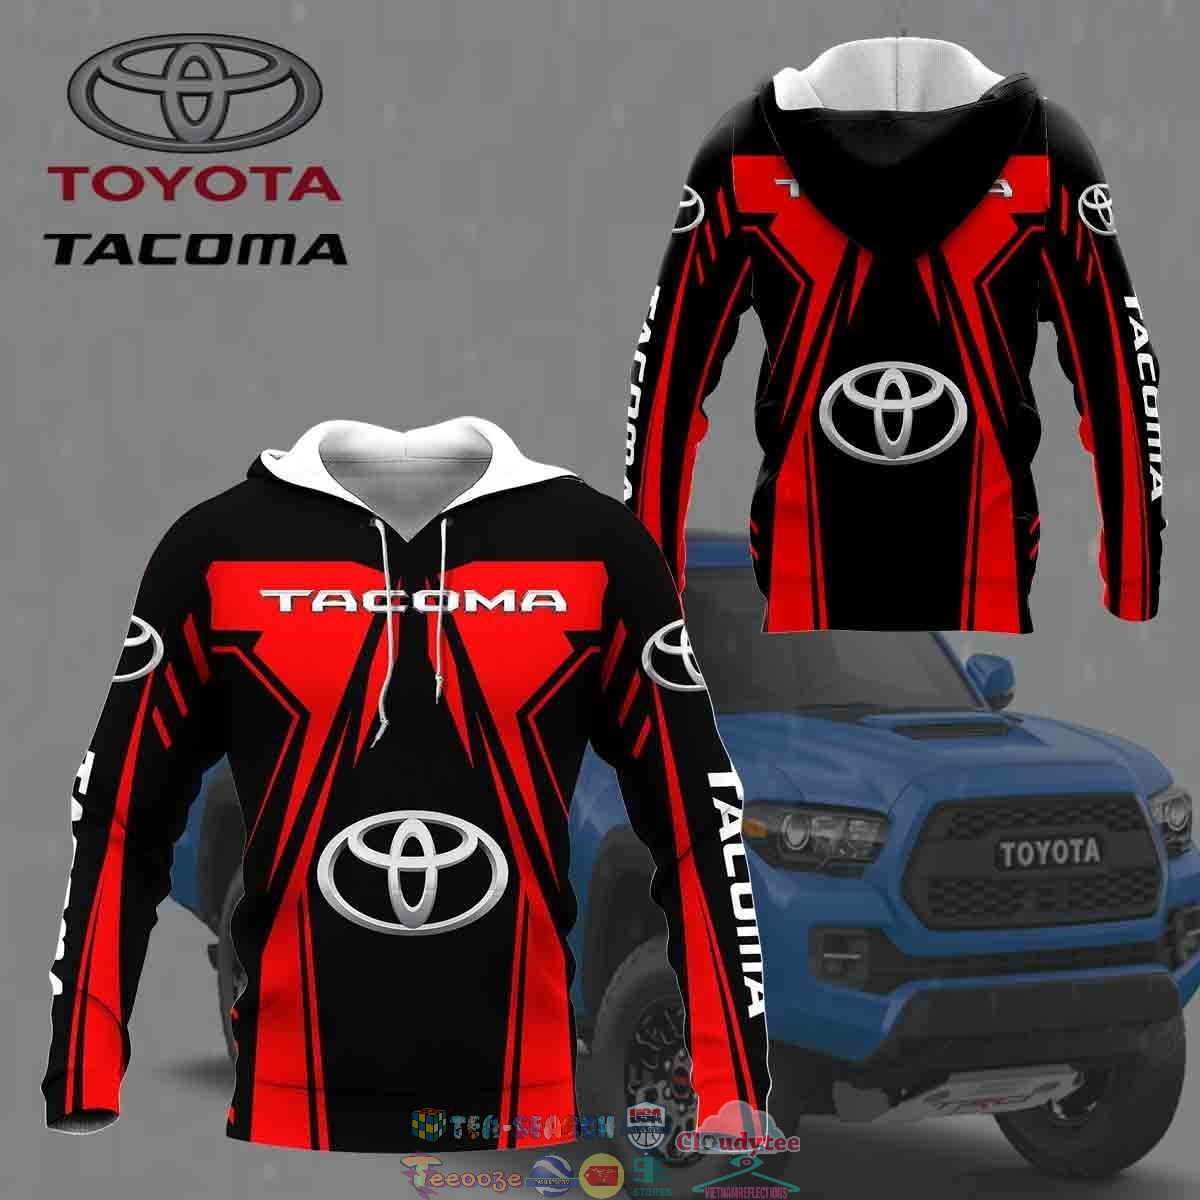 Toyota Tacoma ver 13 3D hoodie and t-shirt